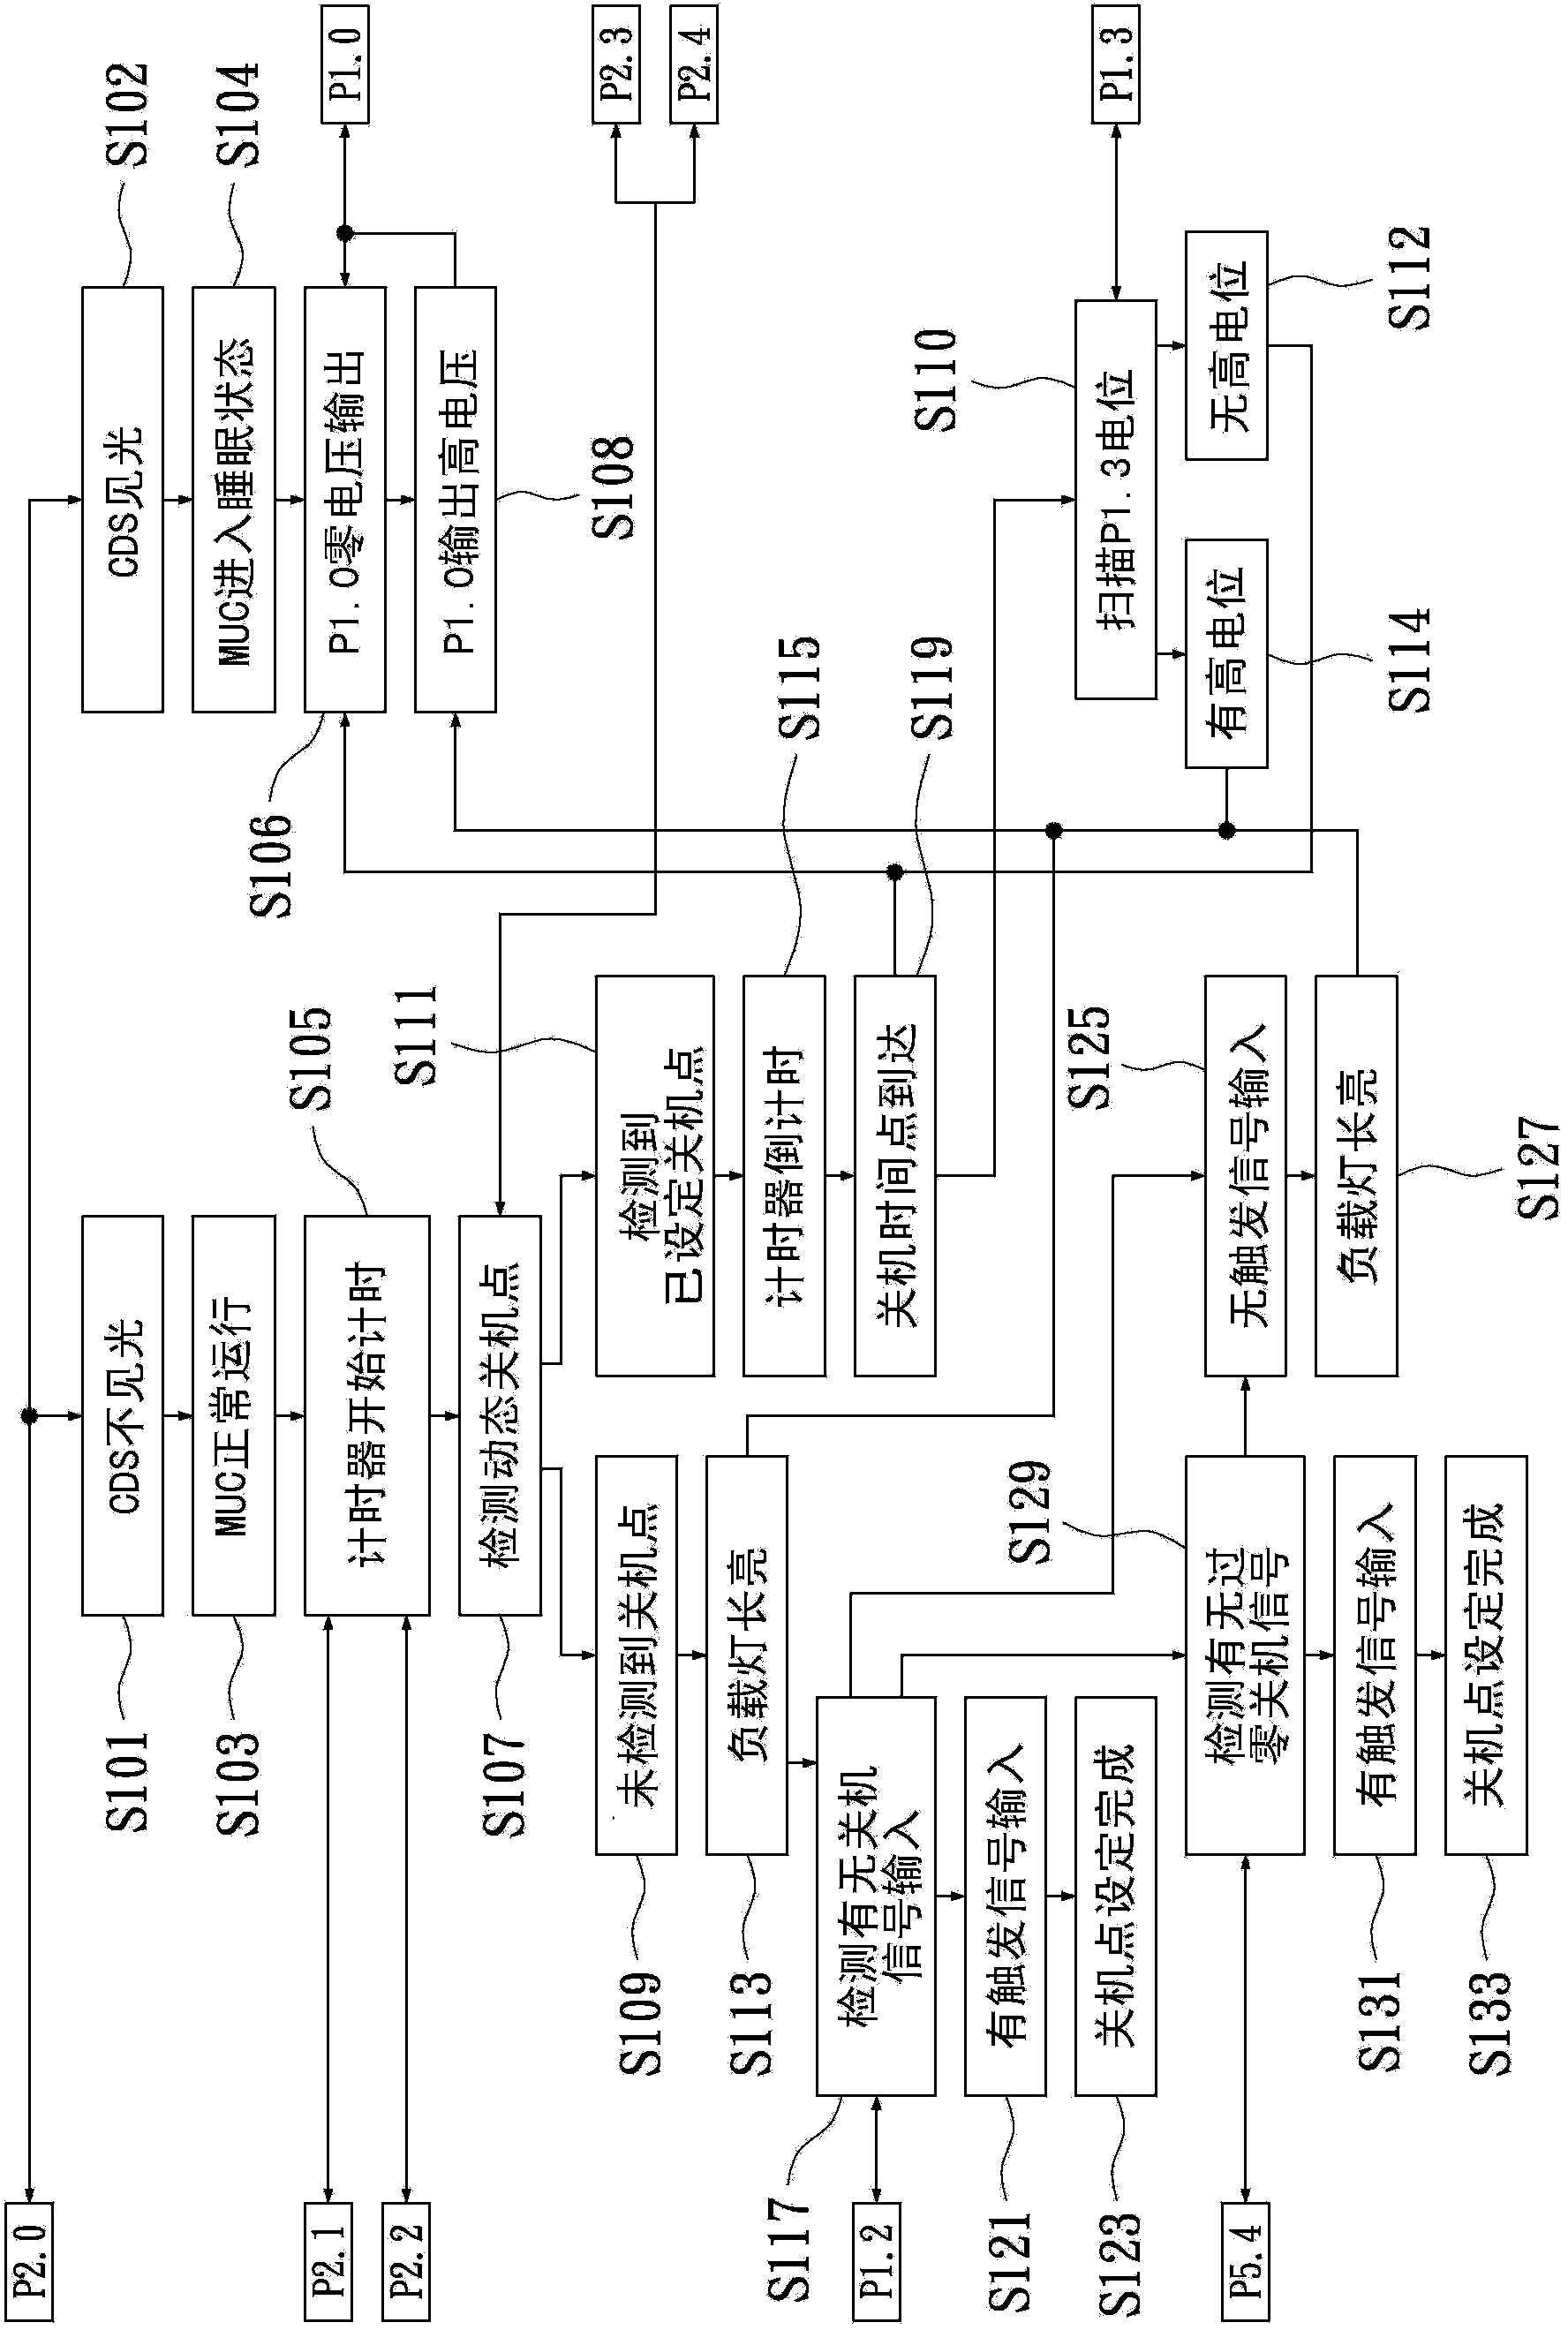 Dual-mode night lighting managing device with dynamic adjustment delay function